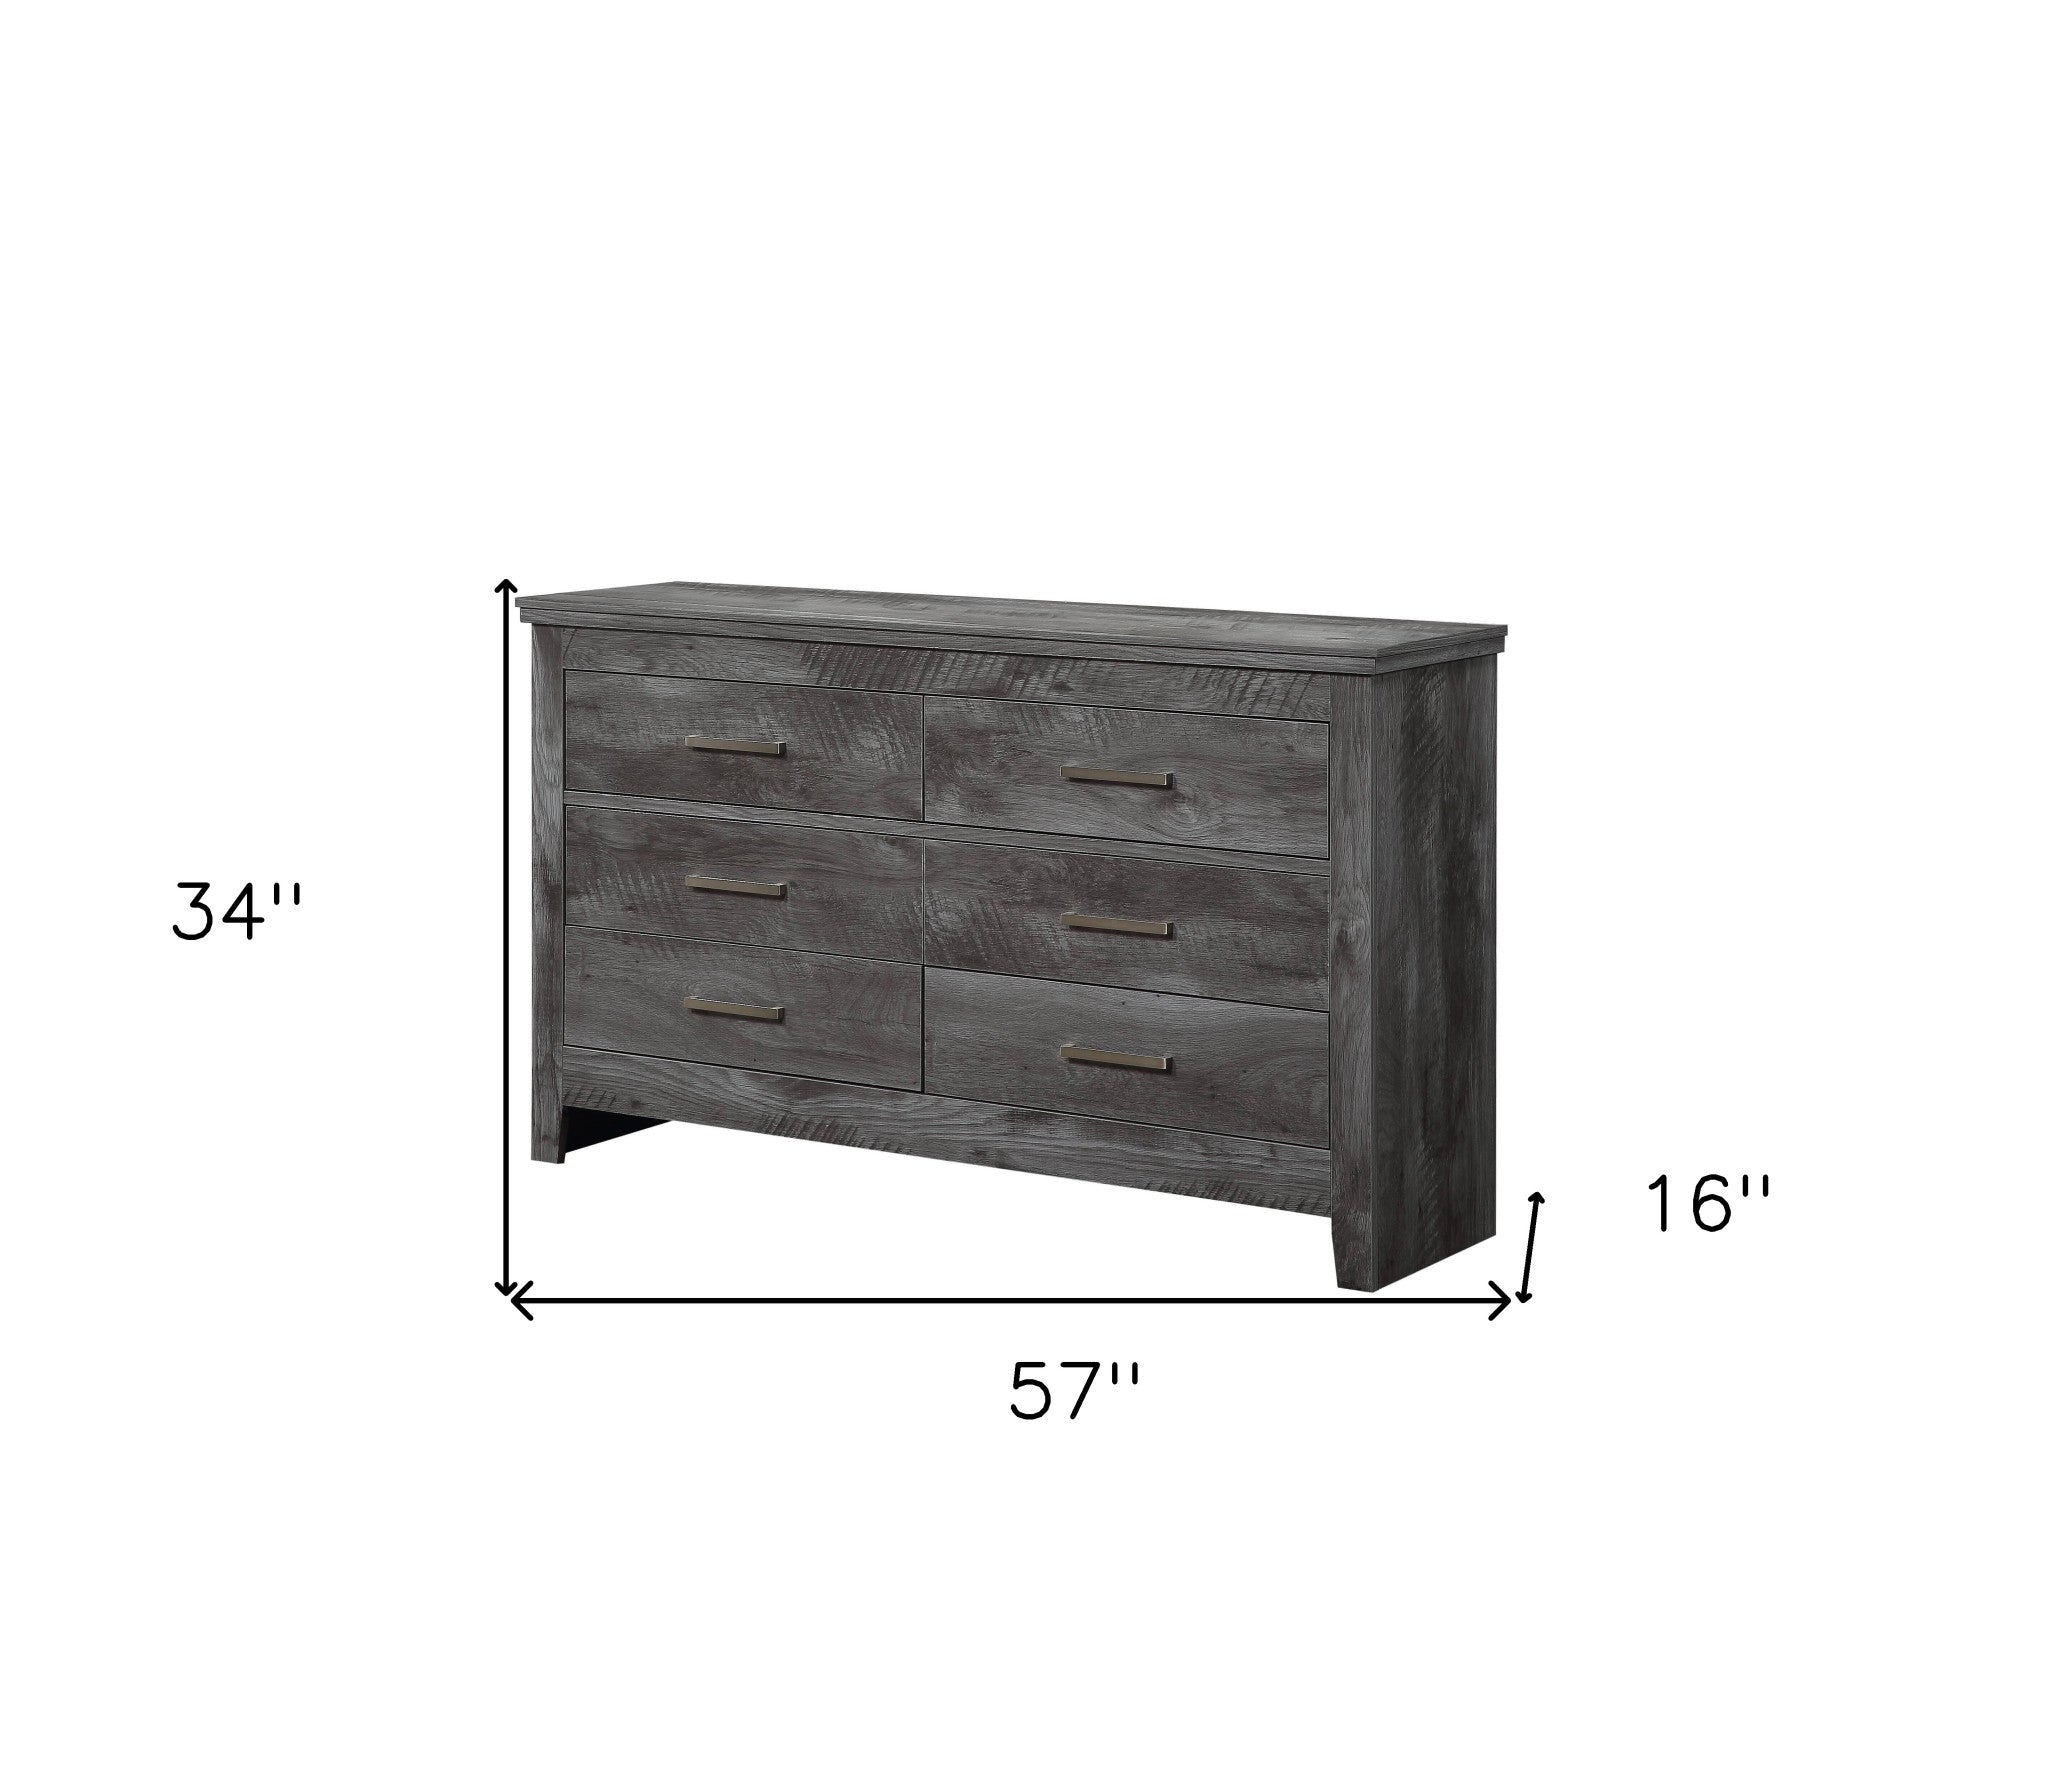 57" Gray Solid and Manufactured Wood Six Drawer Double Dresser